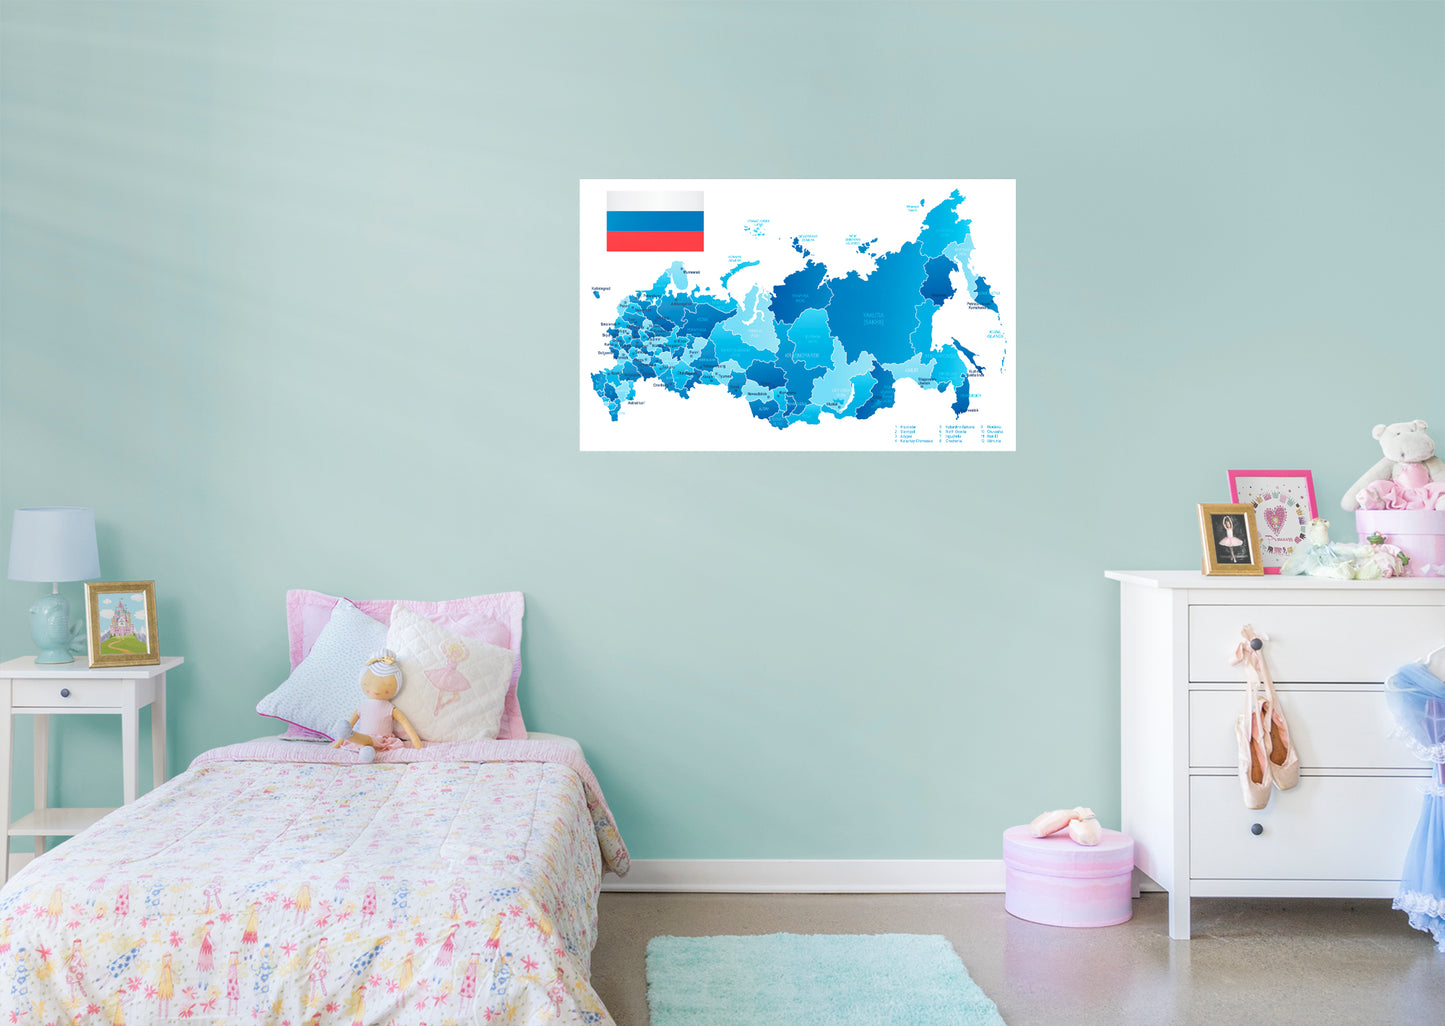 Maps of Asia: Russia Mural        -   Removable Wall   Adhesive Decal